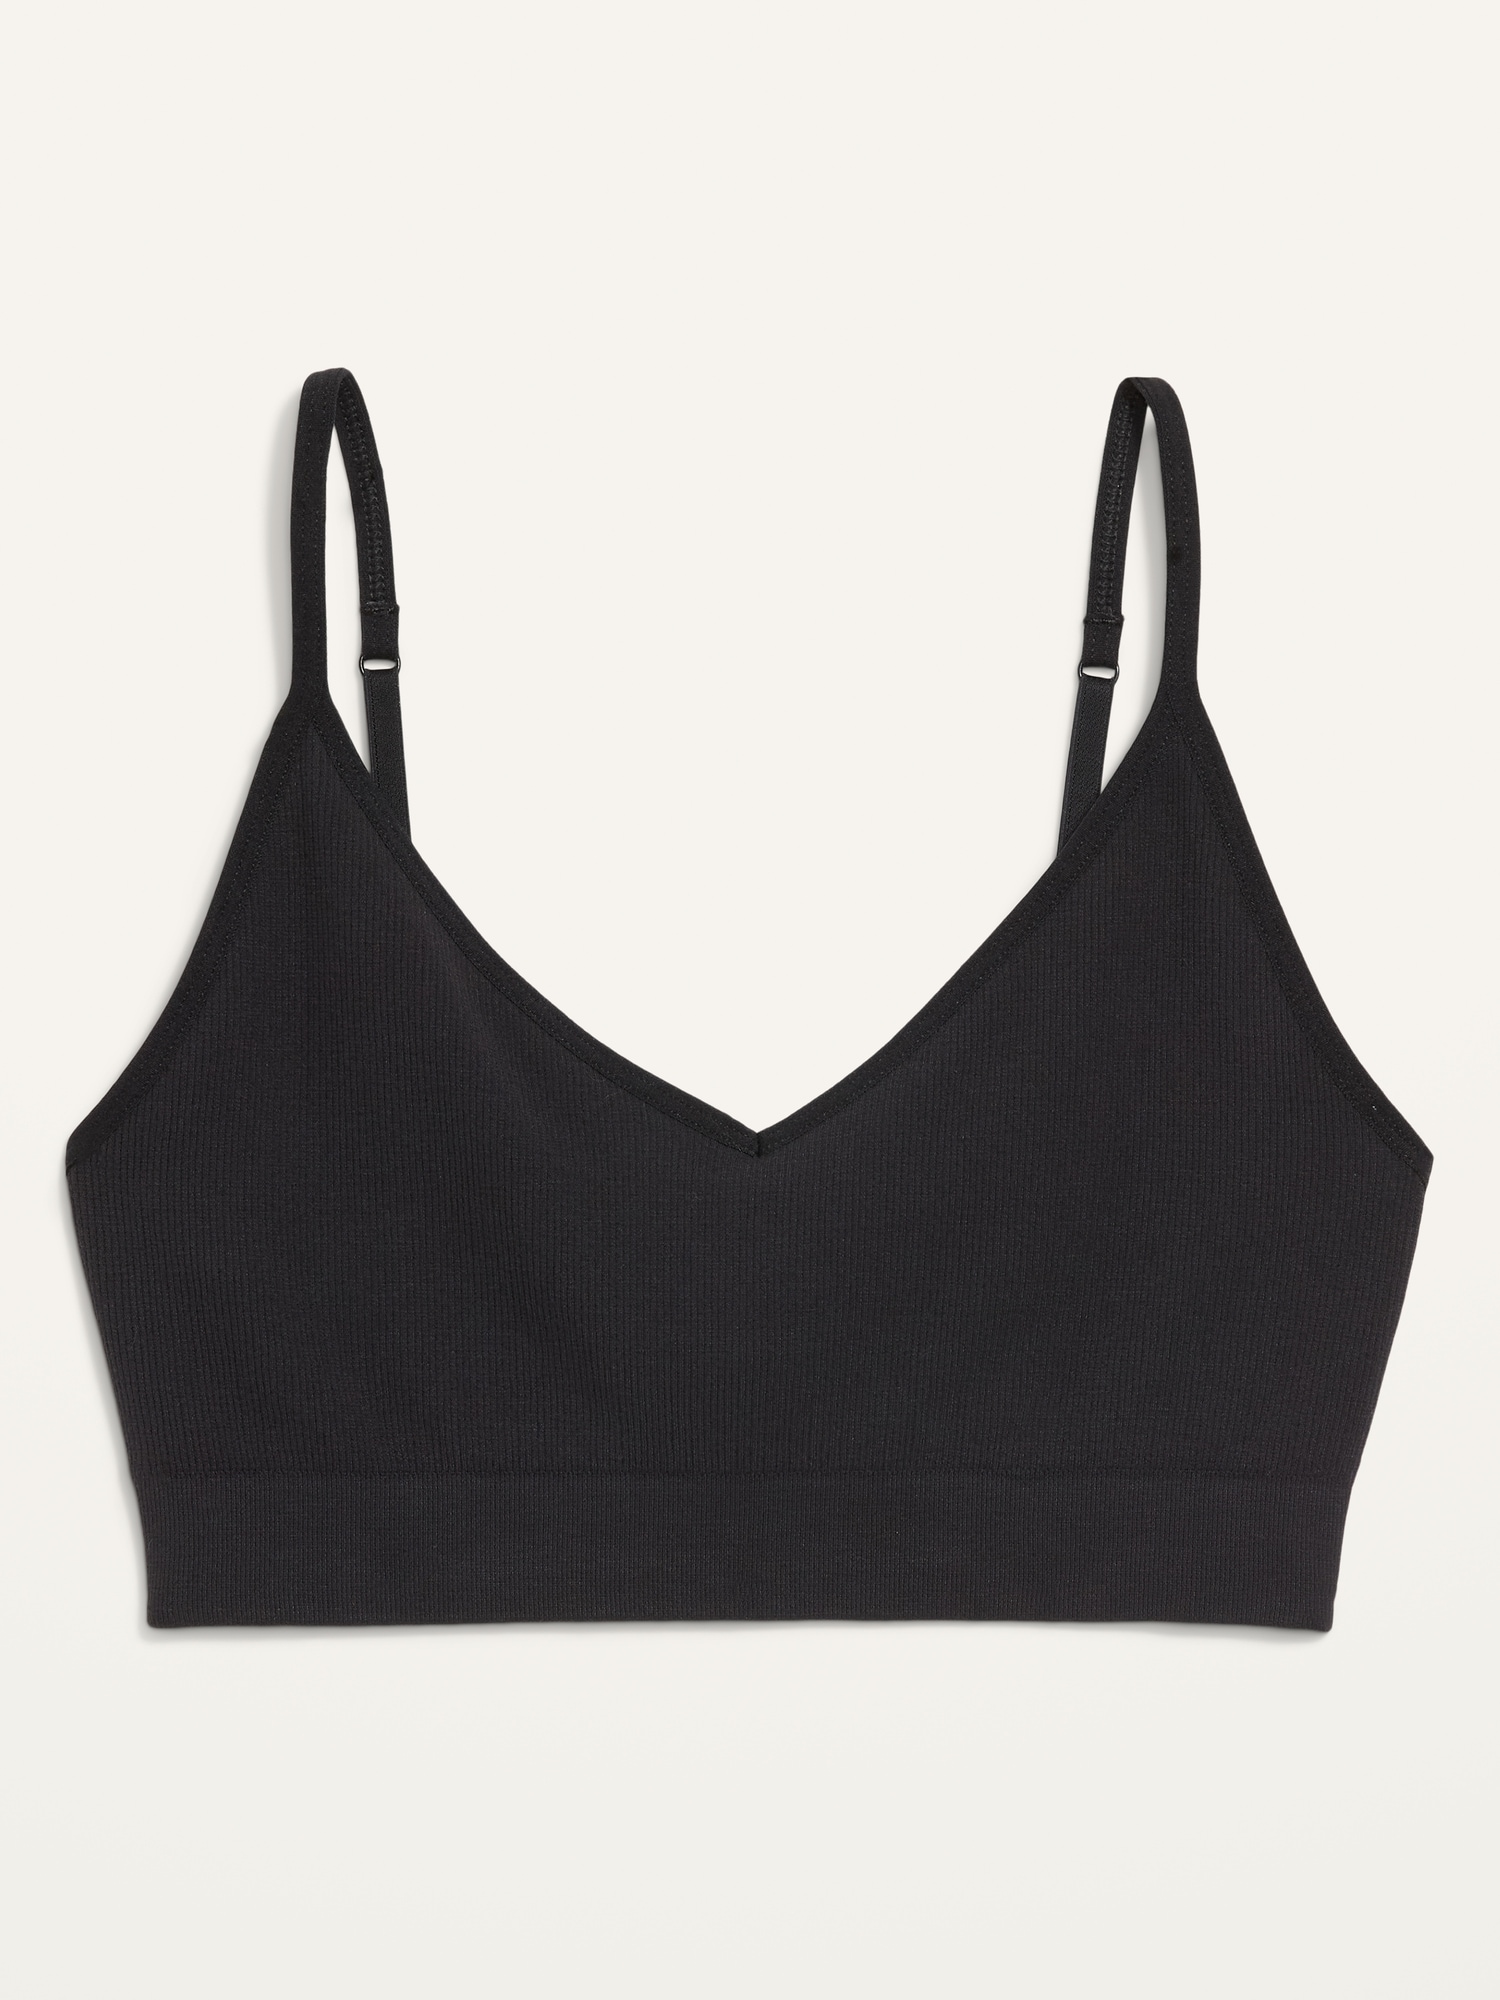 Seamless Lounge Bralette Top for Women 2X-4X | Old Navy